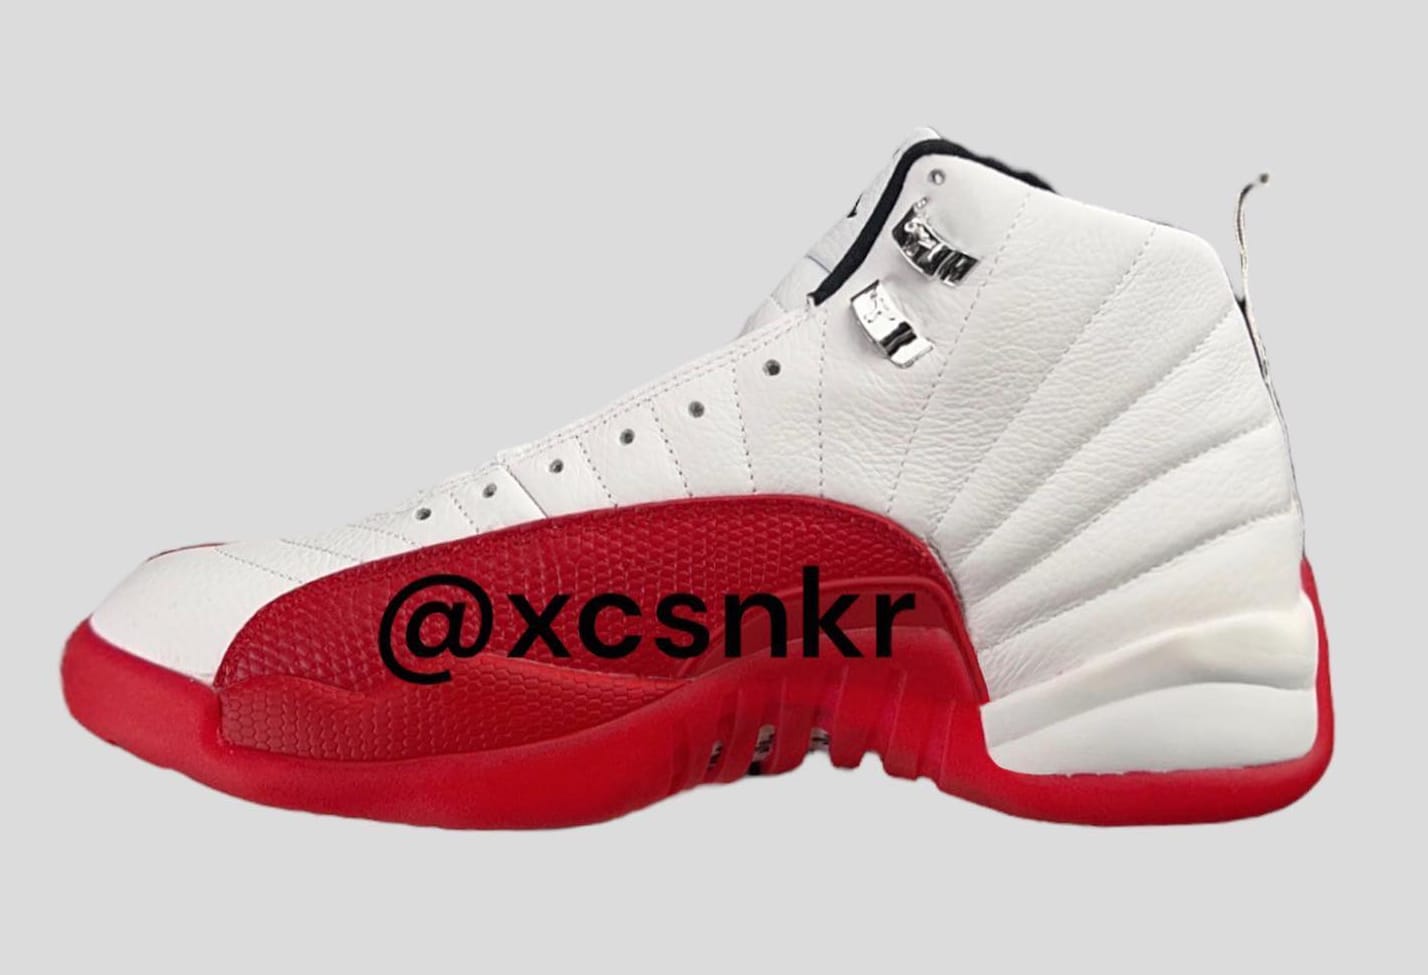 First Look at This Year's 'Cherry' Air Jordan 12 Expected to drop in